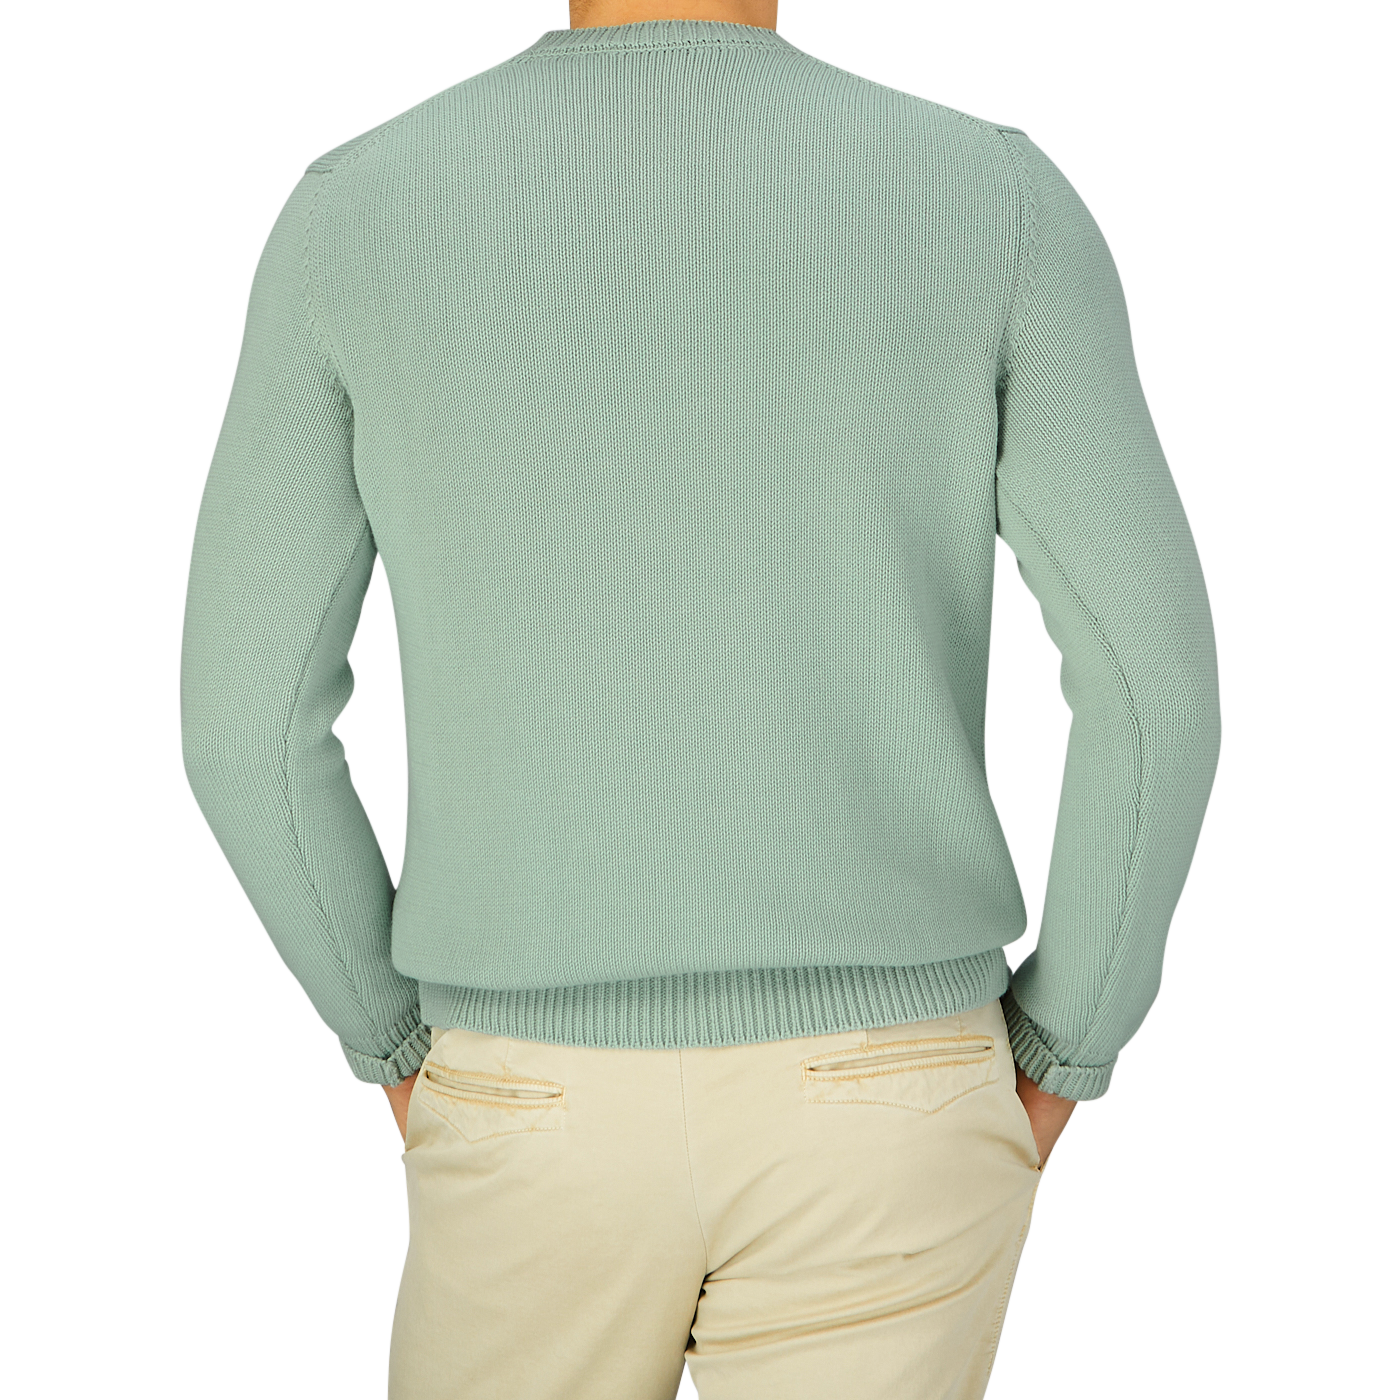 The back view of a man wearing a Zanone Aqua Green Cotton Crew Neck Sweater and khaki pants.